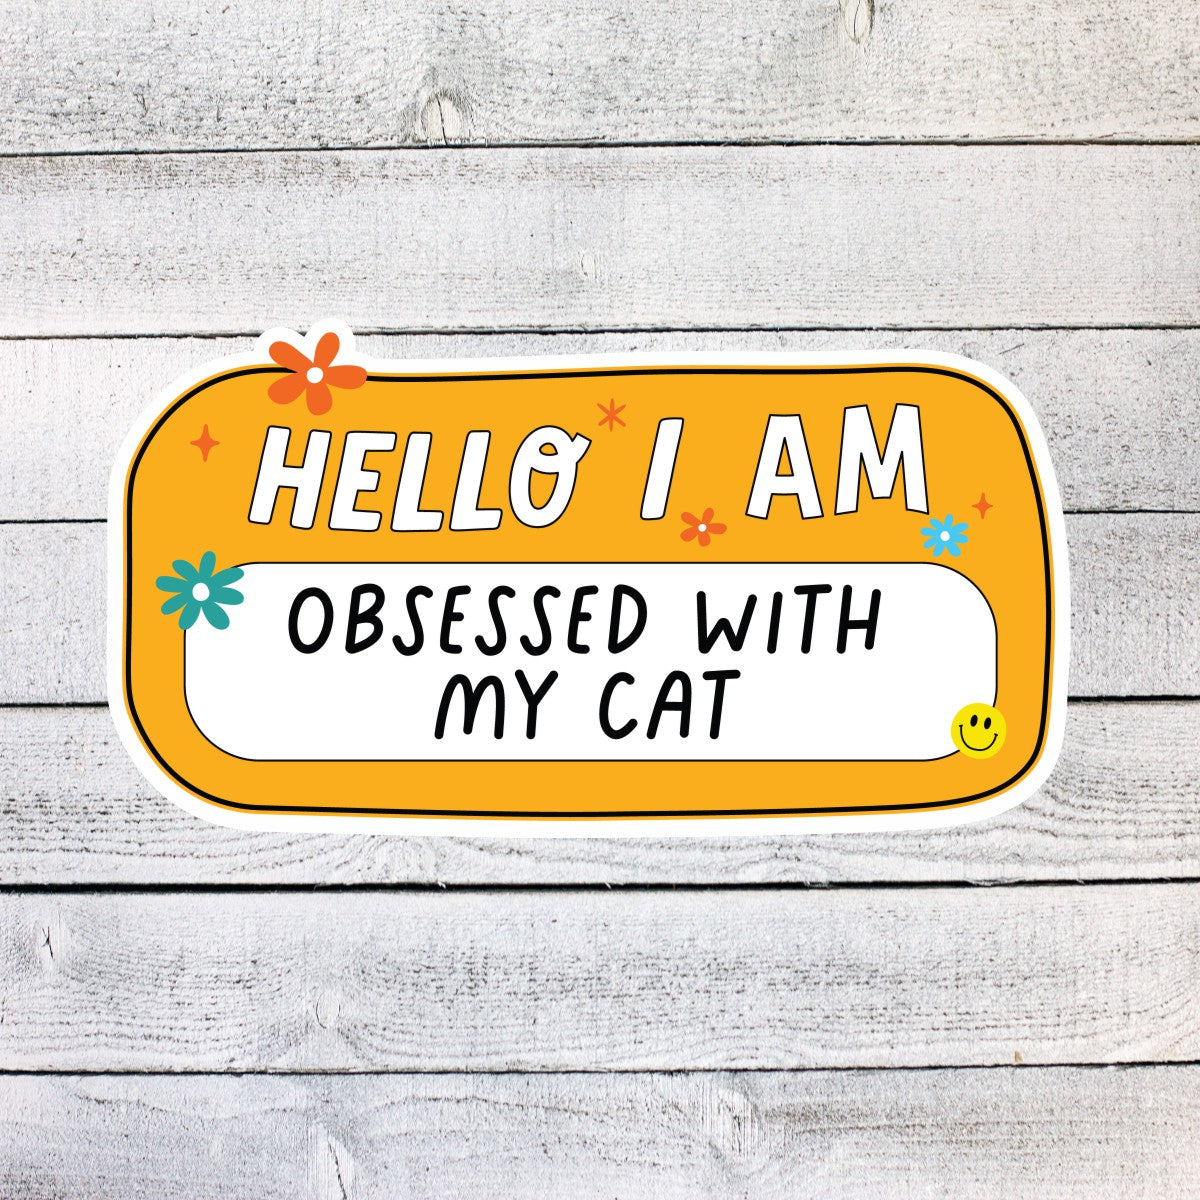 Hello I am Obsessed with my Cat Name Tag Sticker